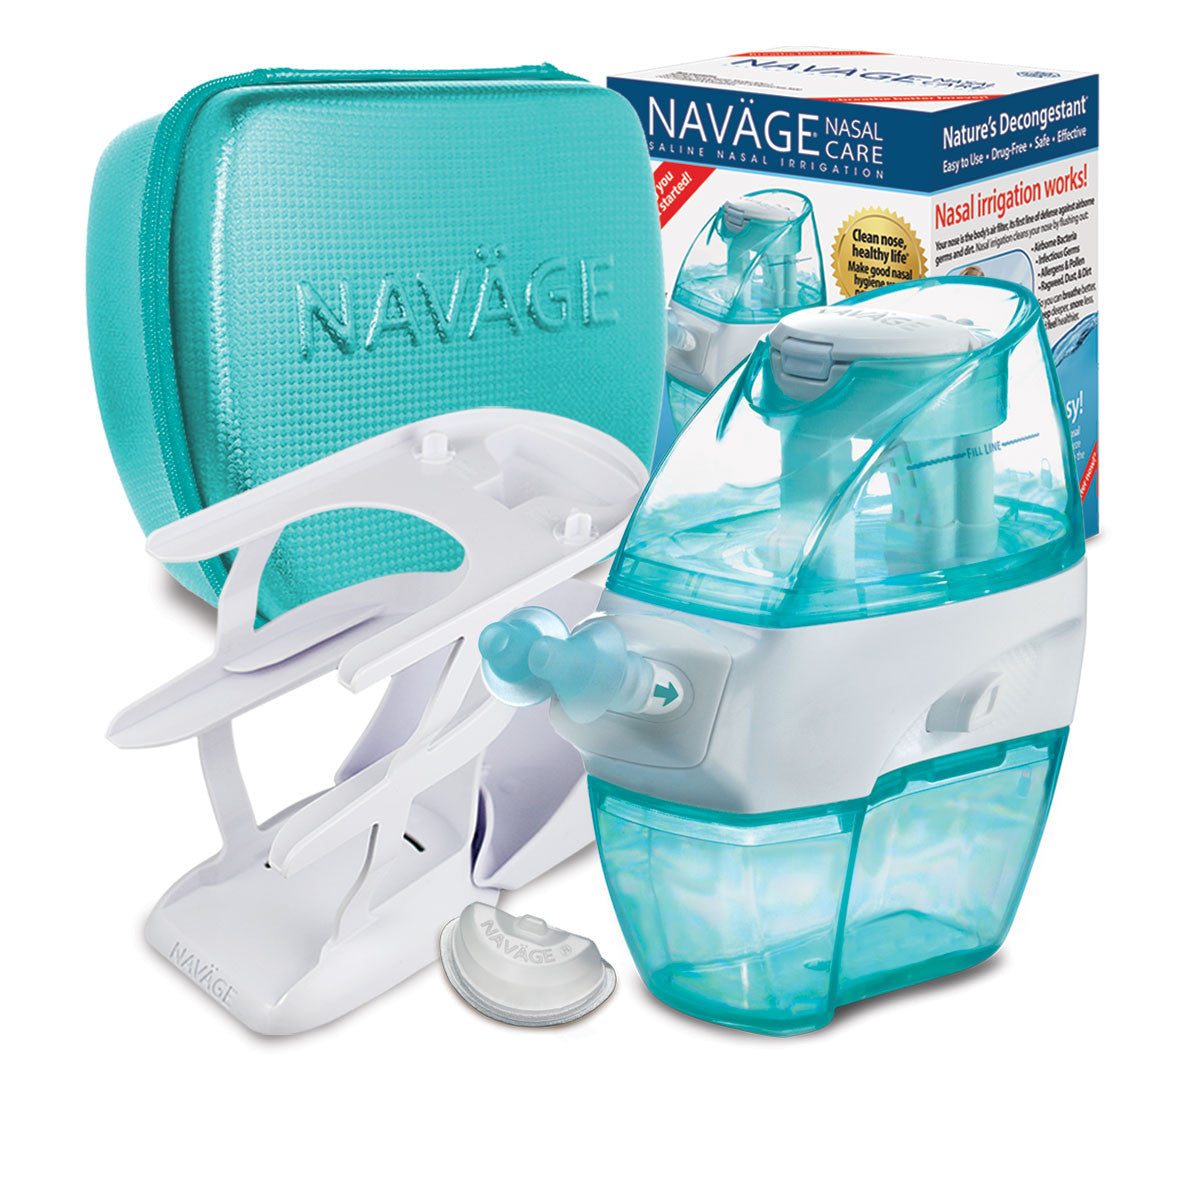 CTL Home Center - Navage nasal care provides fast